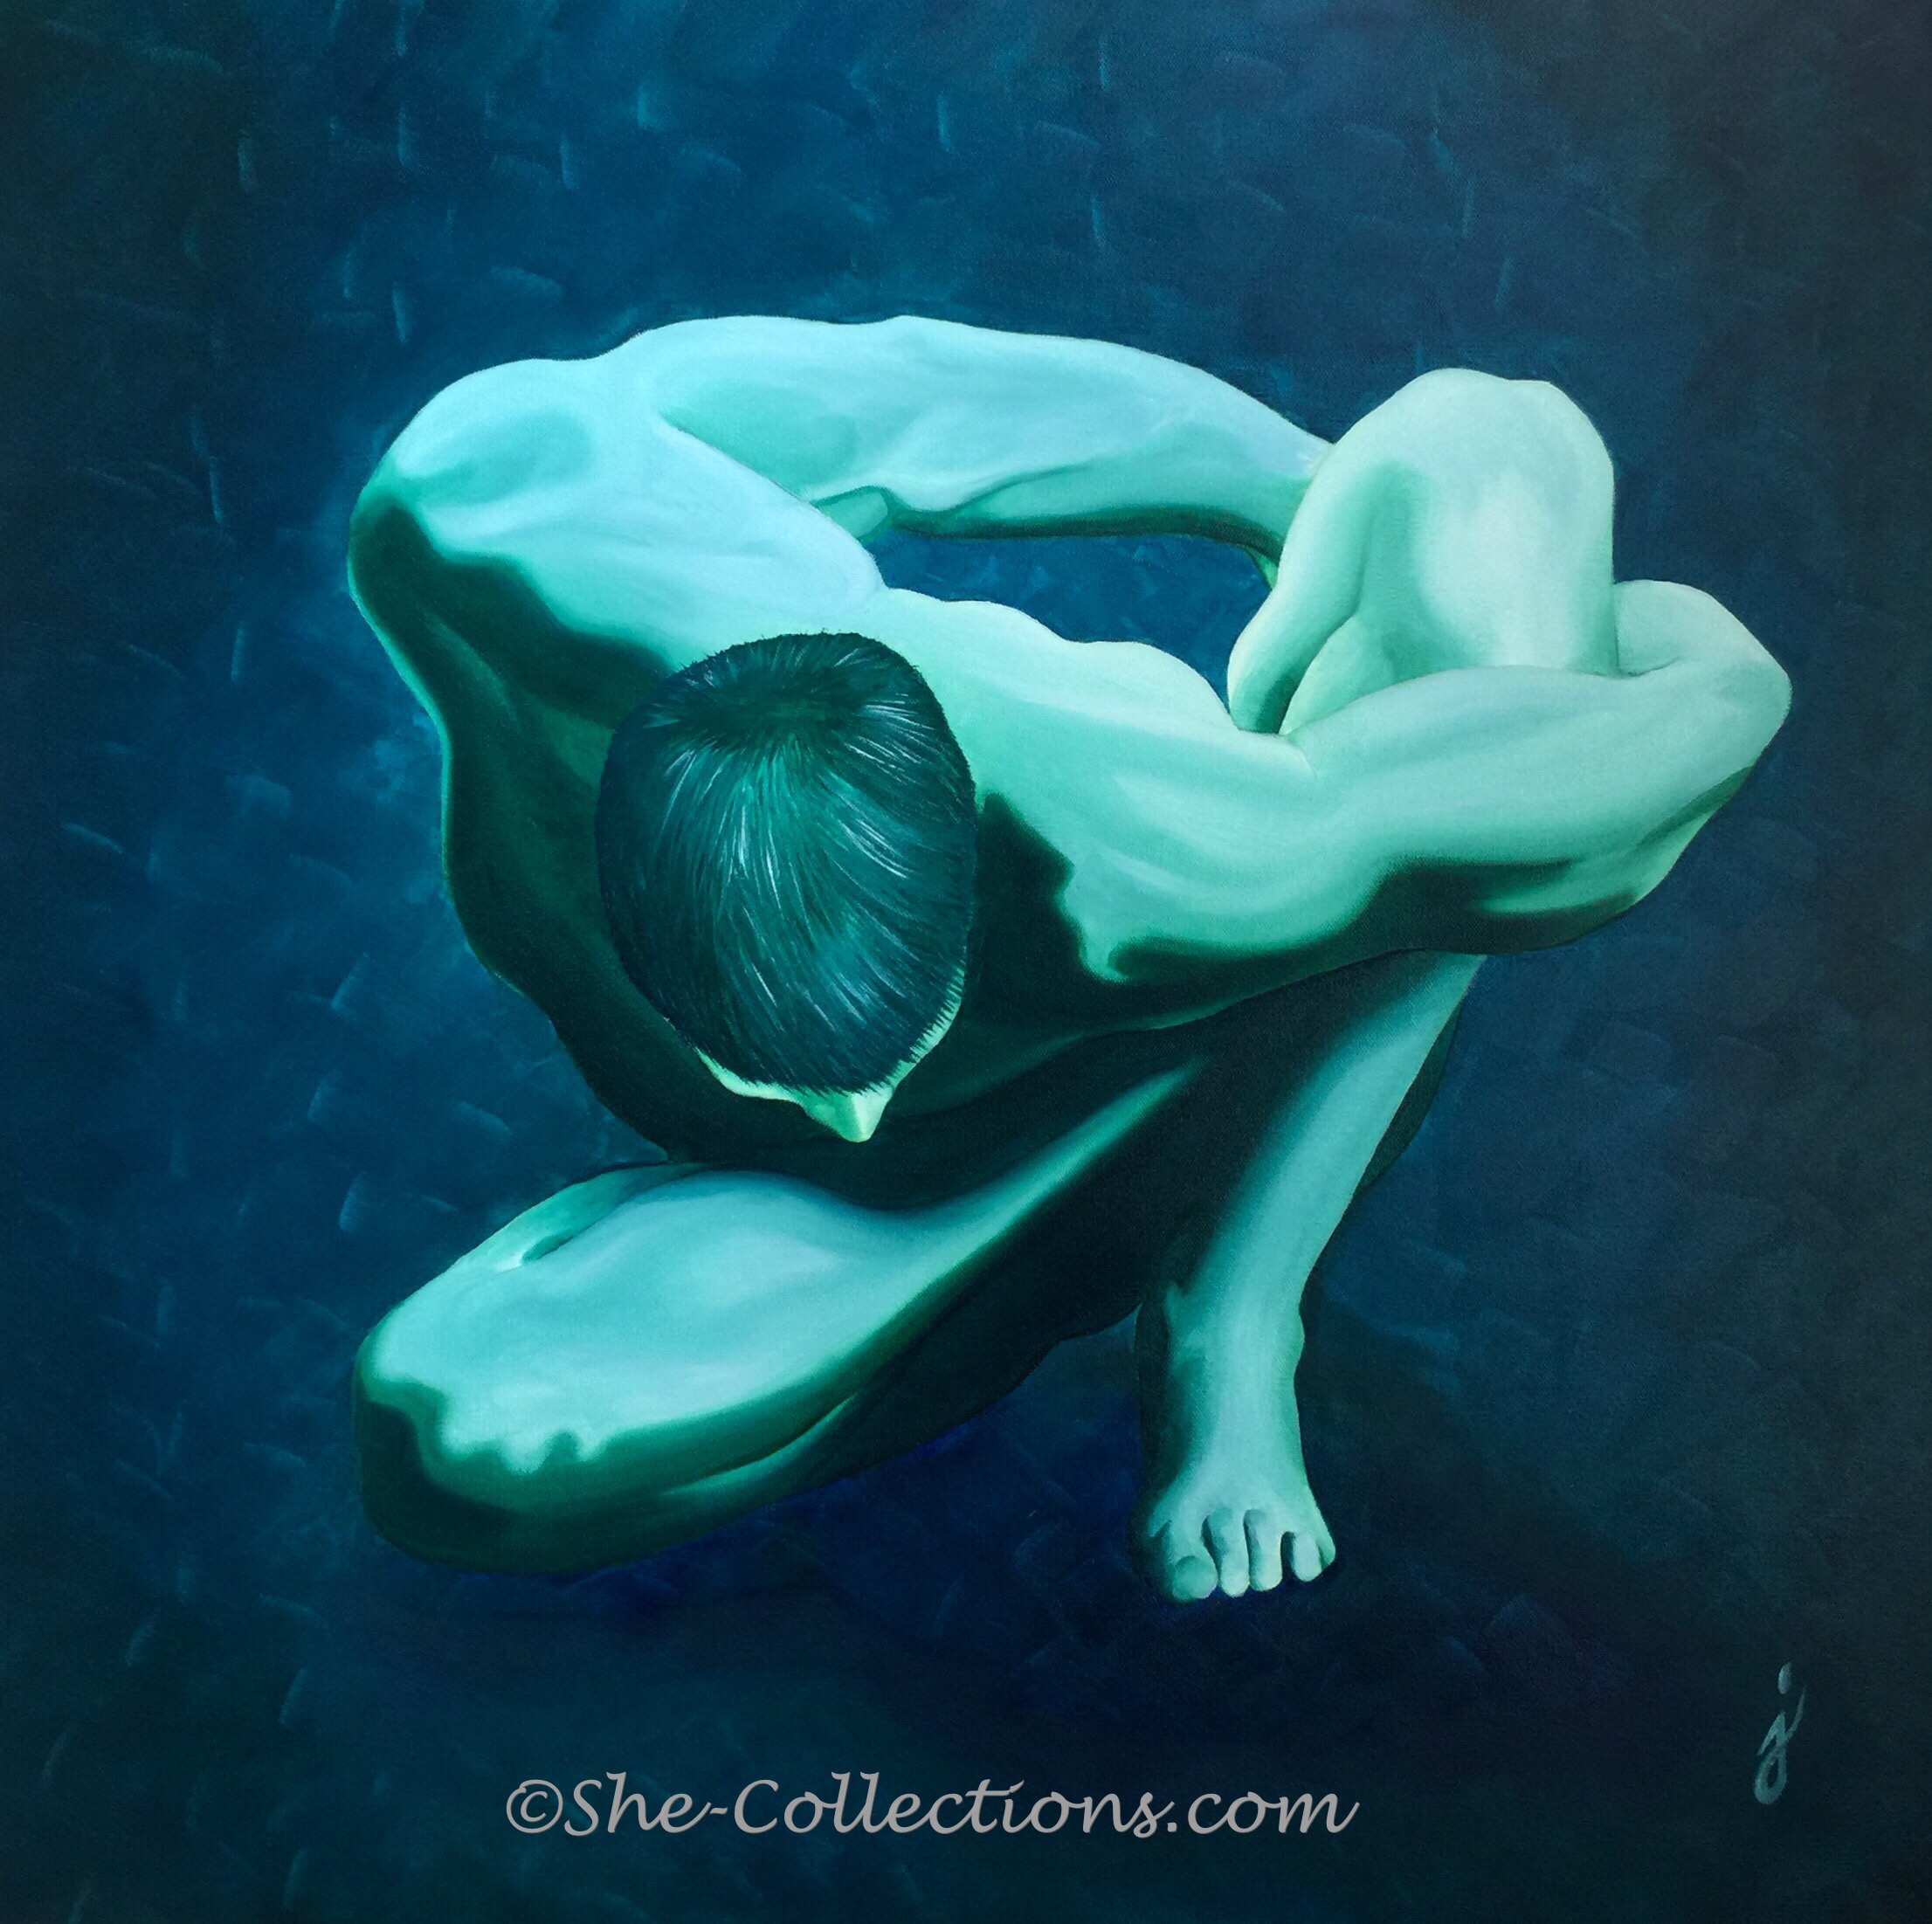 Imprisoned by She Collections artist Jenna Garcia yoga art series